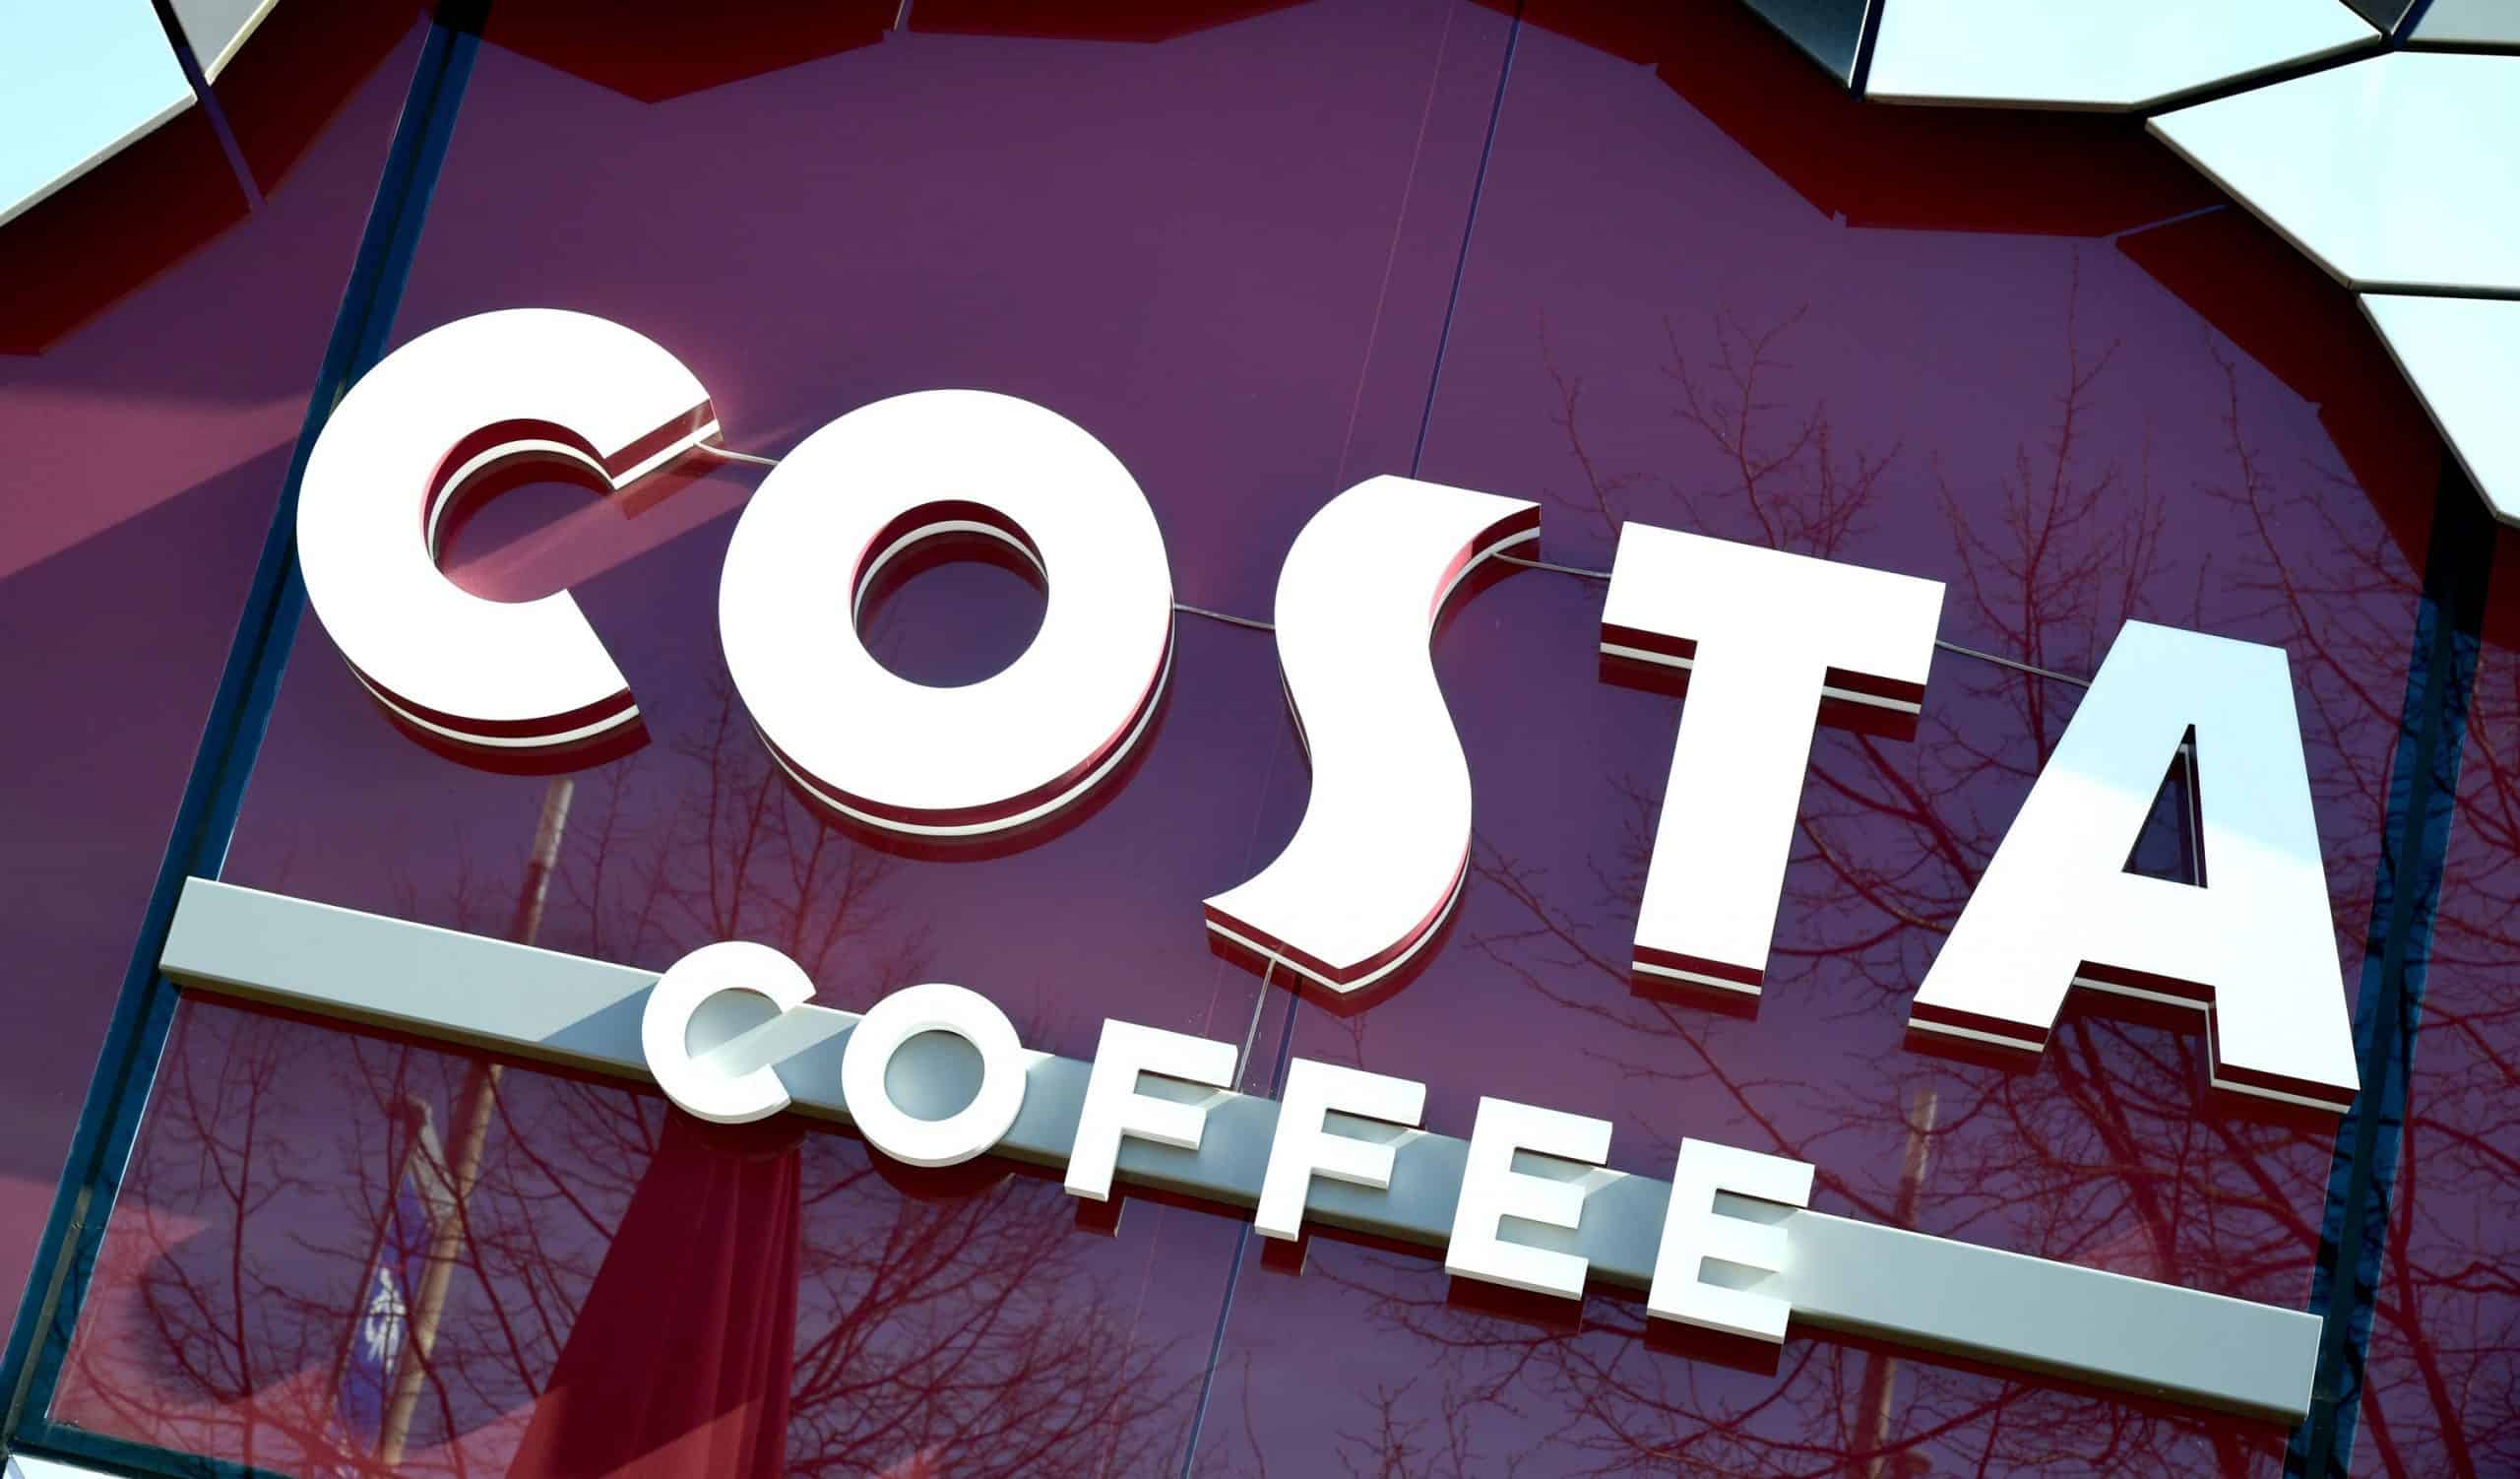 Costa: UK anti-vaxxers boycotting coffee chain over its vaccination policy in different country